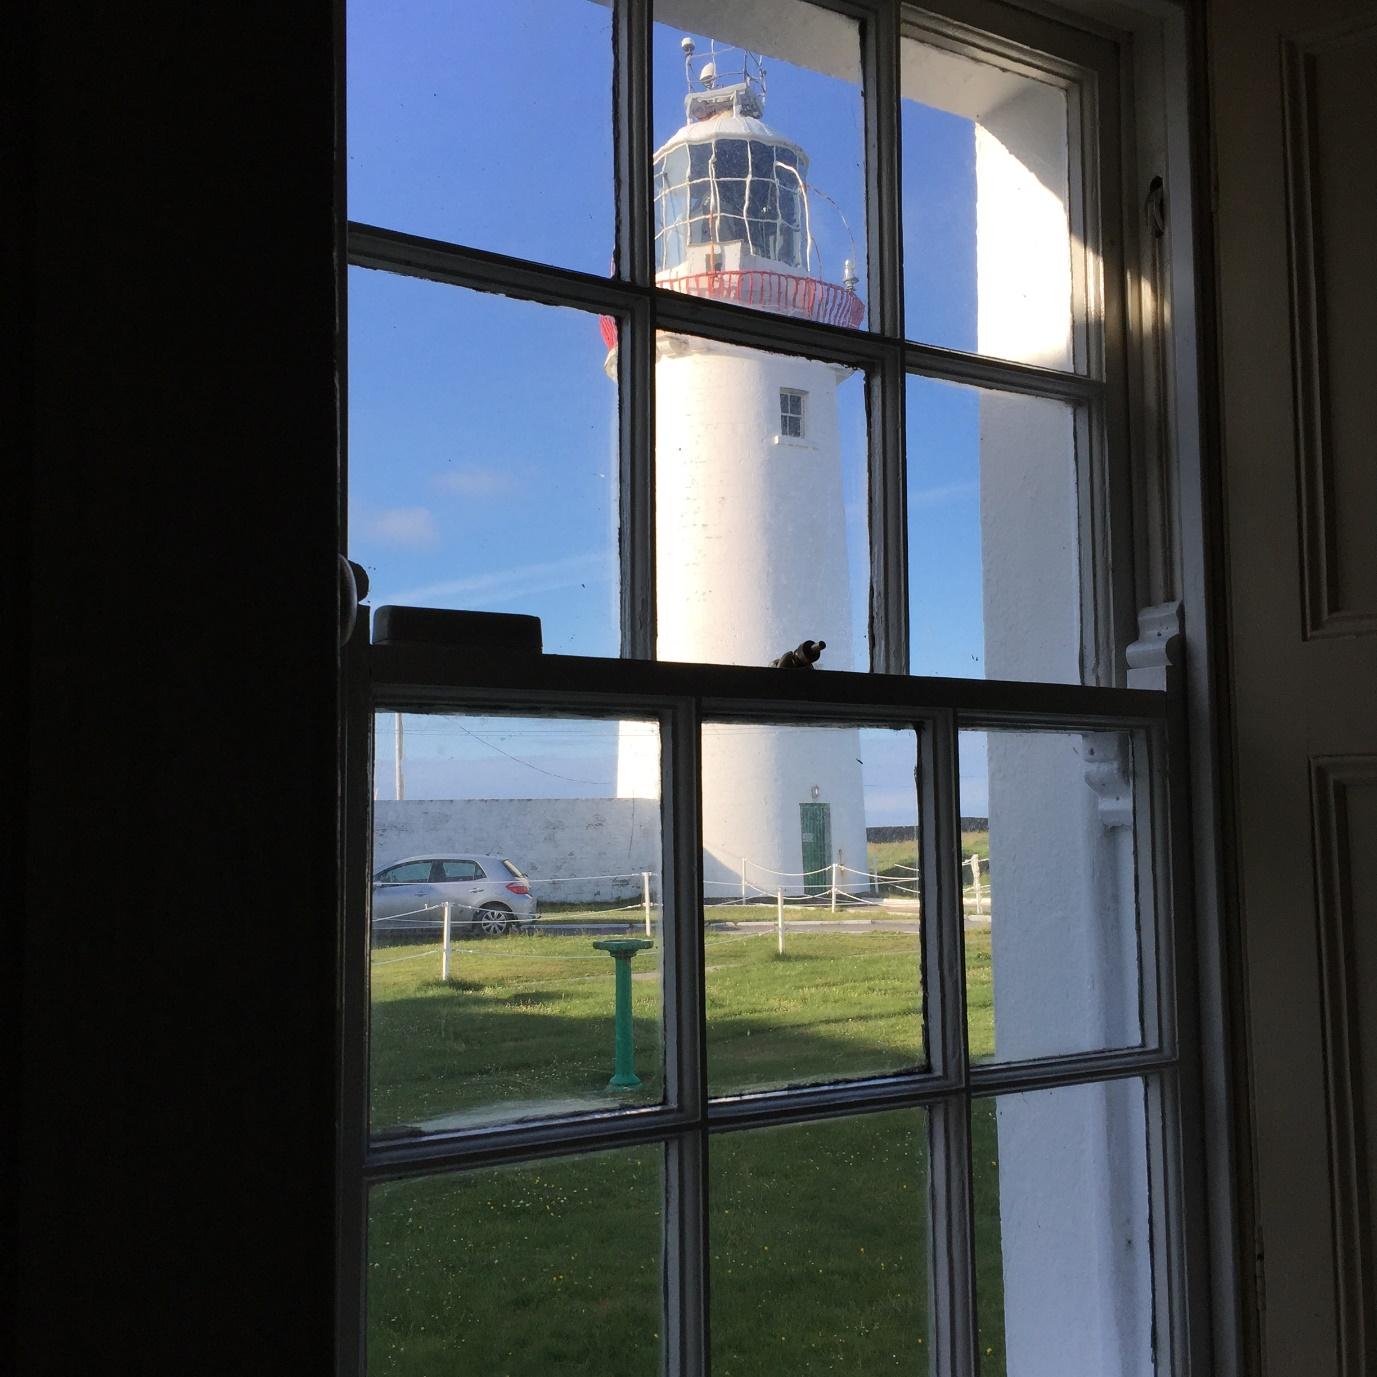 Looking through a window to a white light house surrounded by green grass